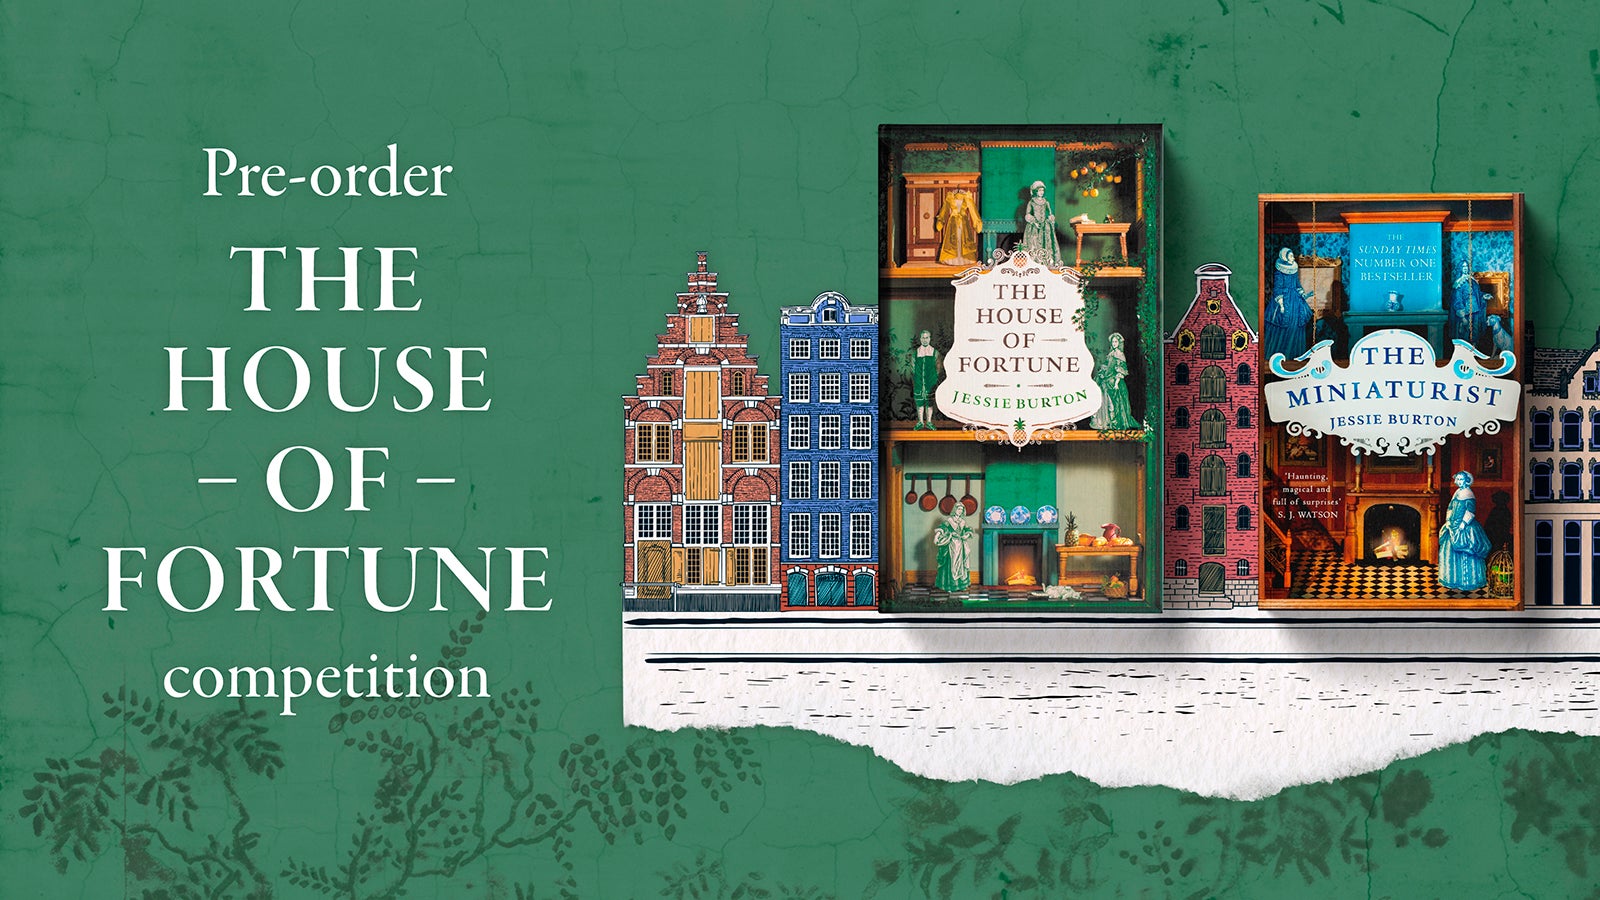 A graphic reading 'Pre-order The House of Fortune competition' alongside a copy of The House of Fortune and The Miniaturist.